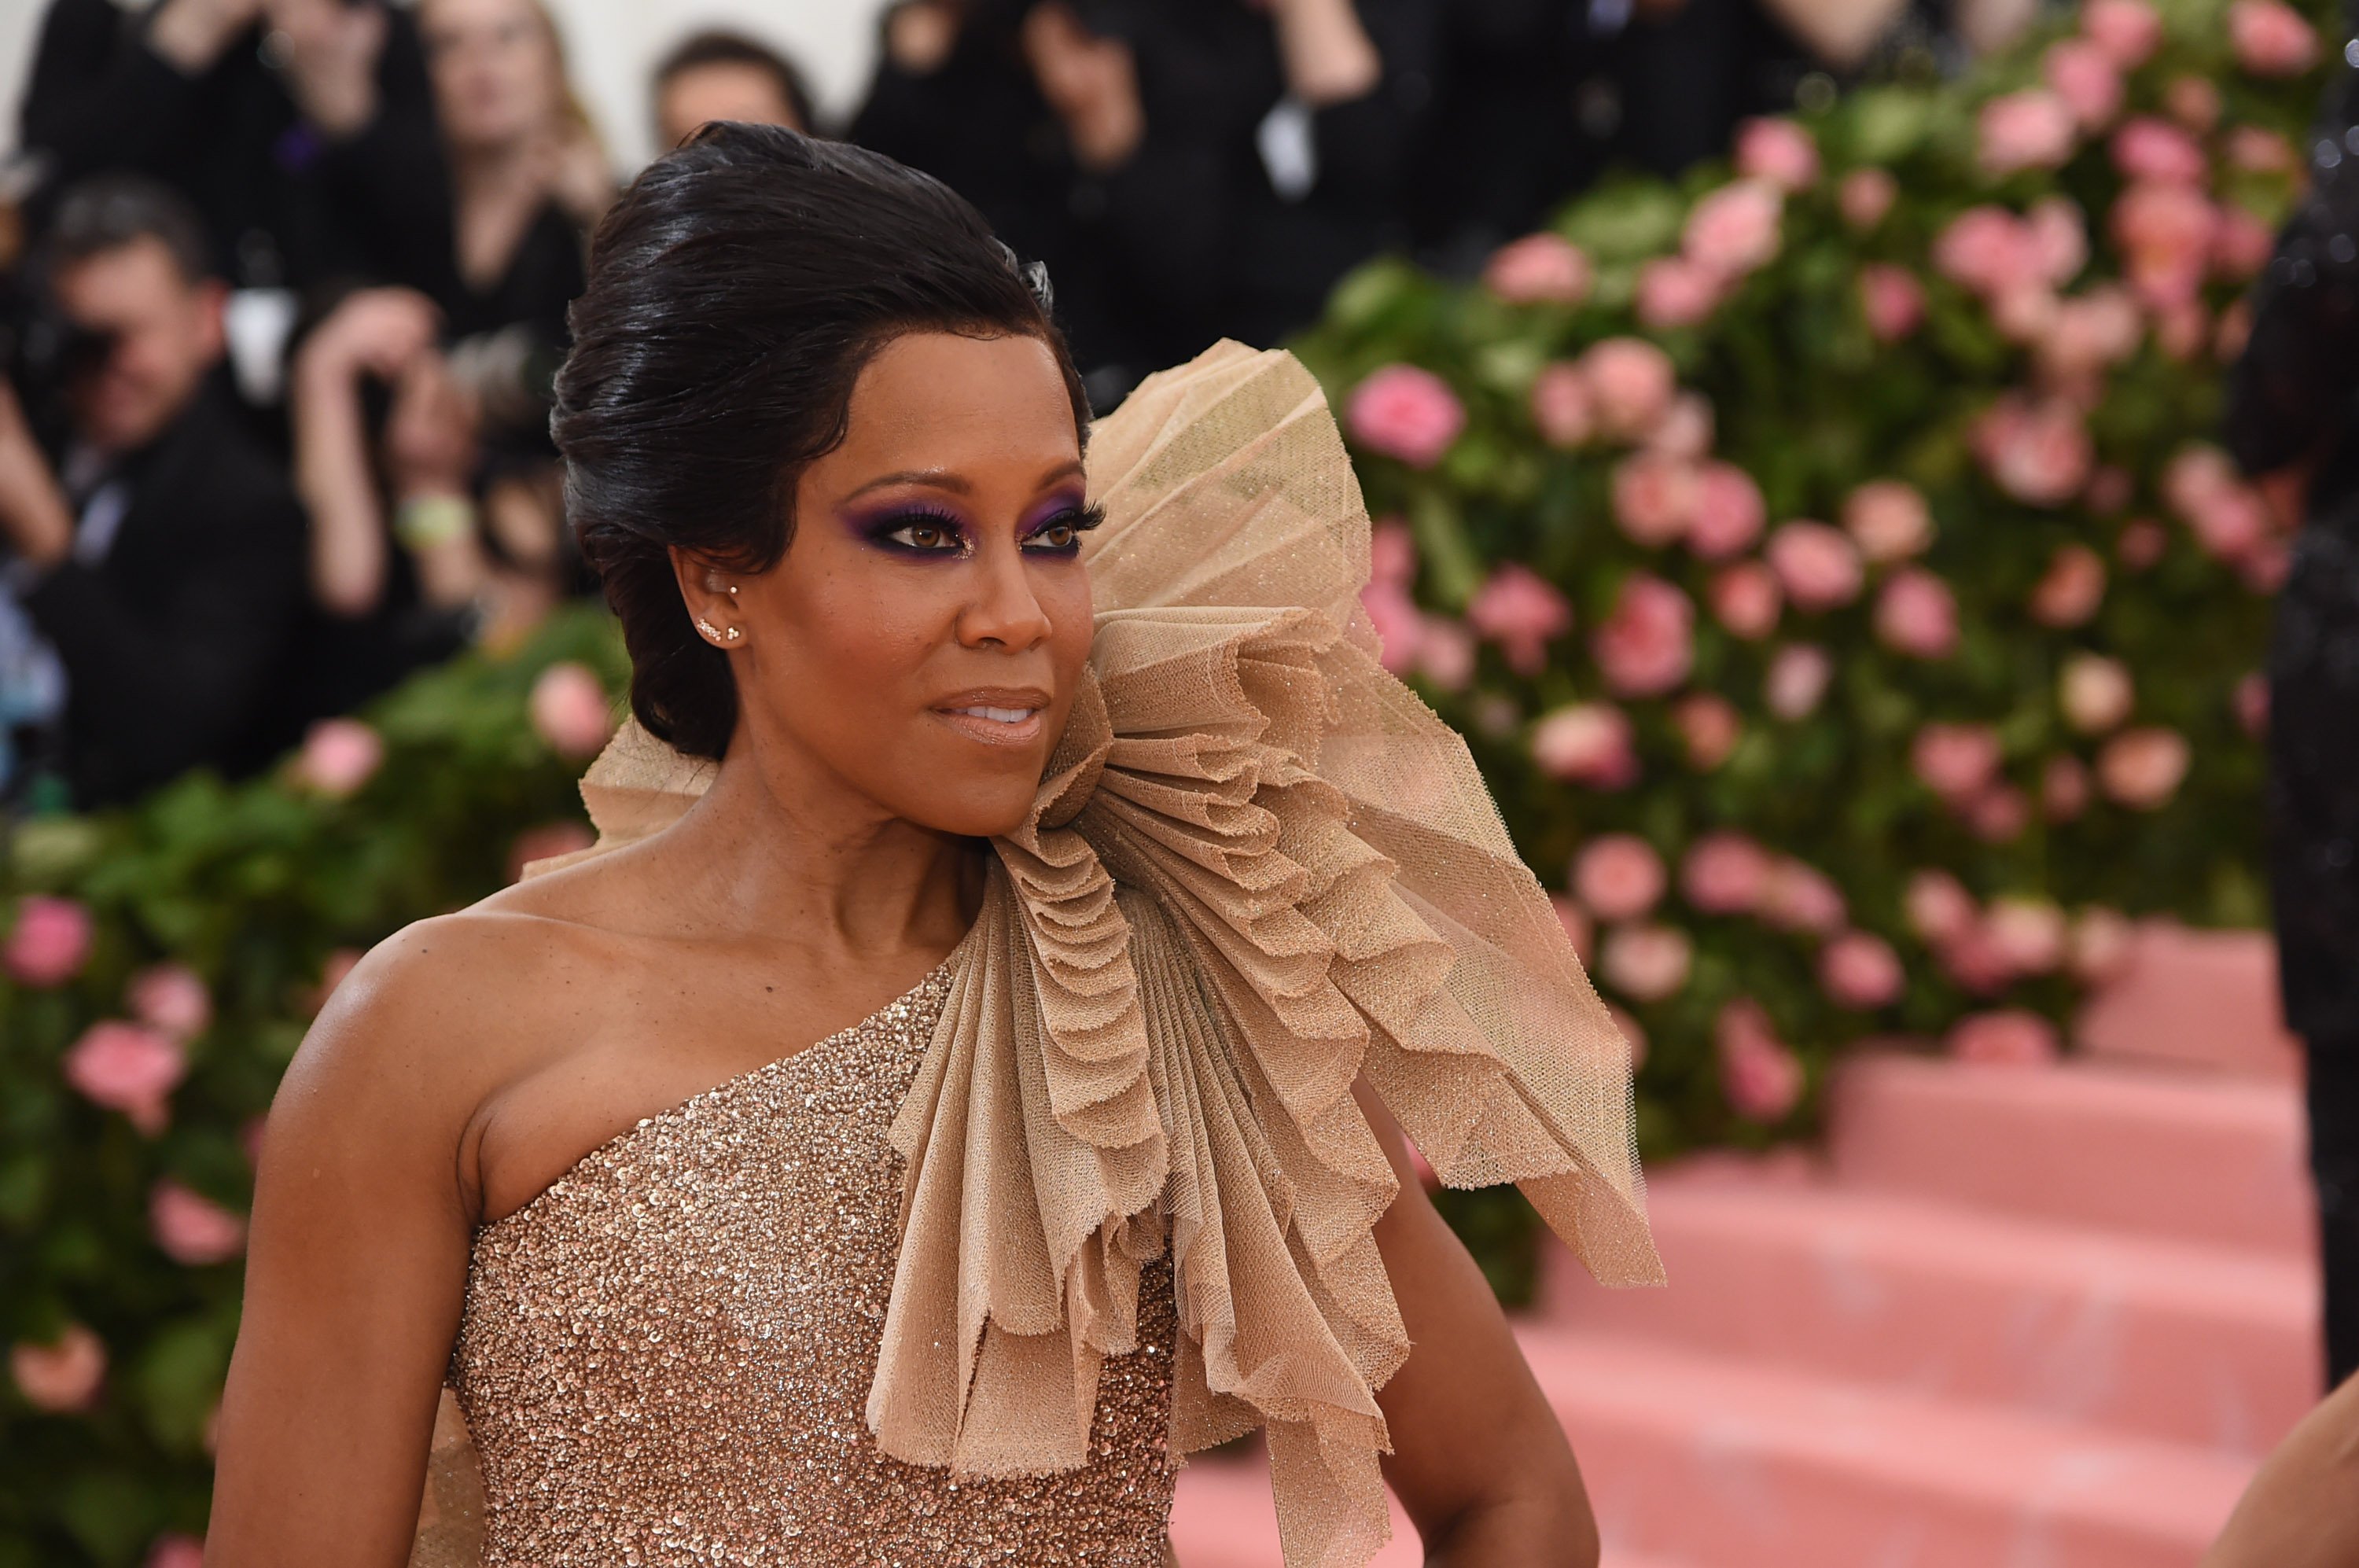 Regina King at the 2019 Met Gala Celebrating Camp at the Metropolitan Museum of Art on May 06, 2019 in New York City | Photo: Getty Images